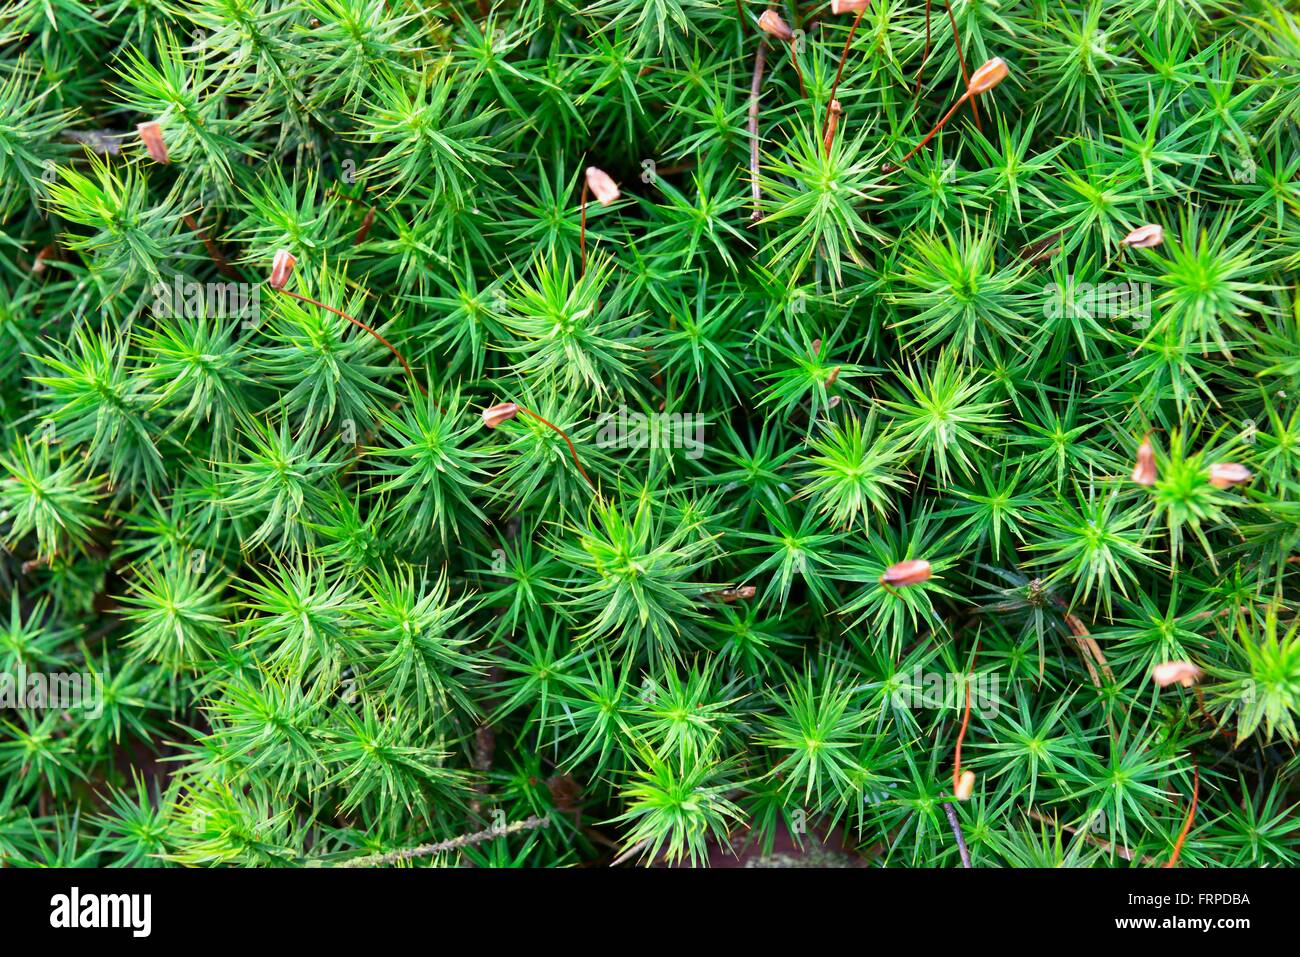 Common haircap (Polytrichum commune) with small flowers, Bavaria, Upper Bavaria, Germany Stock Photo